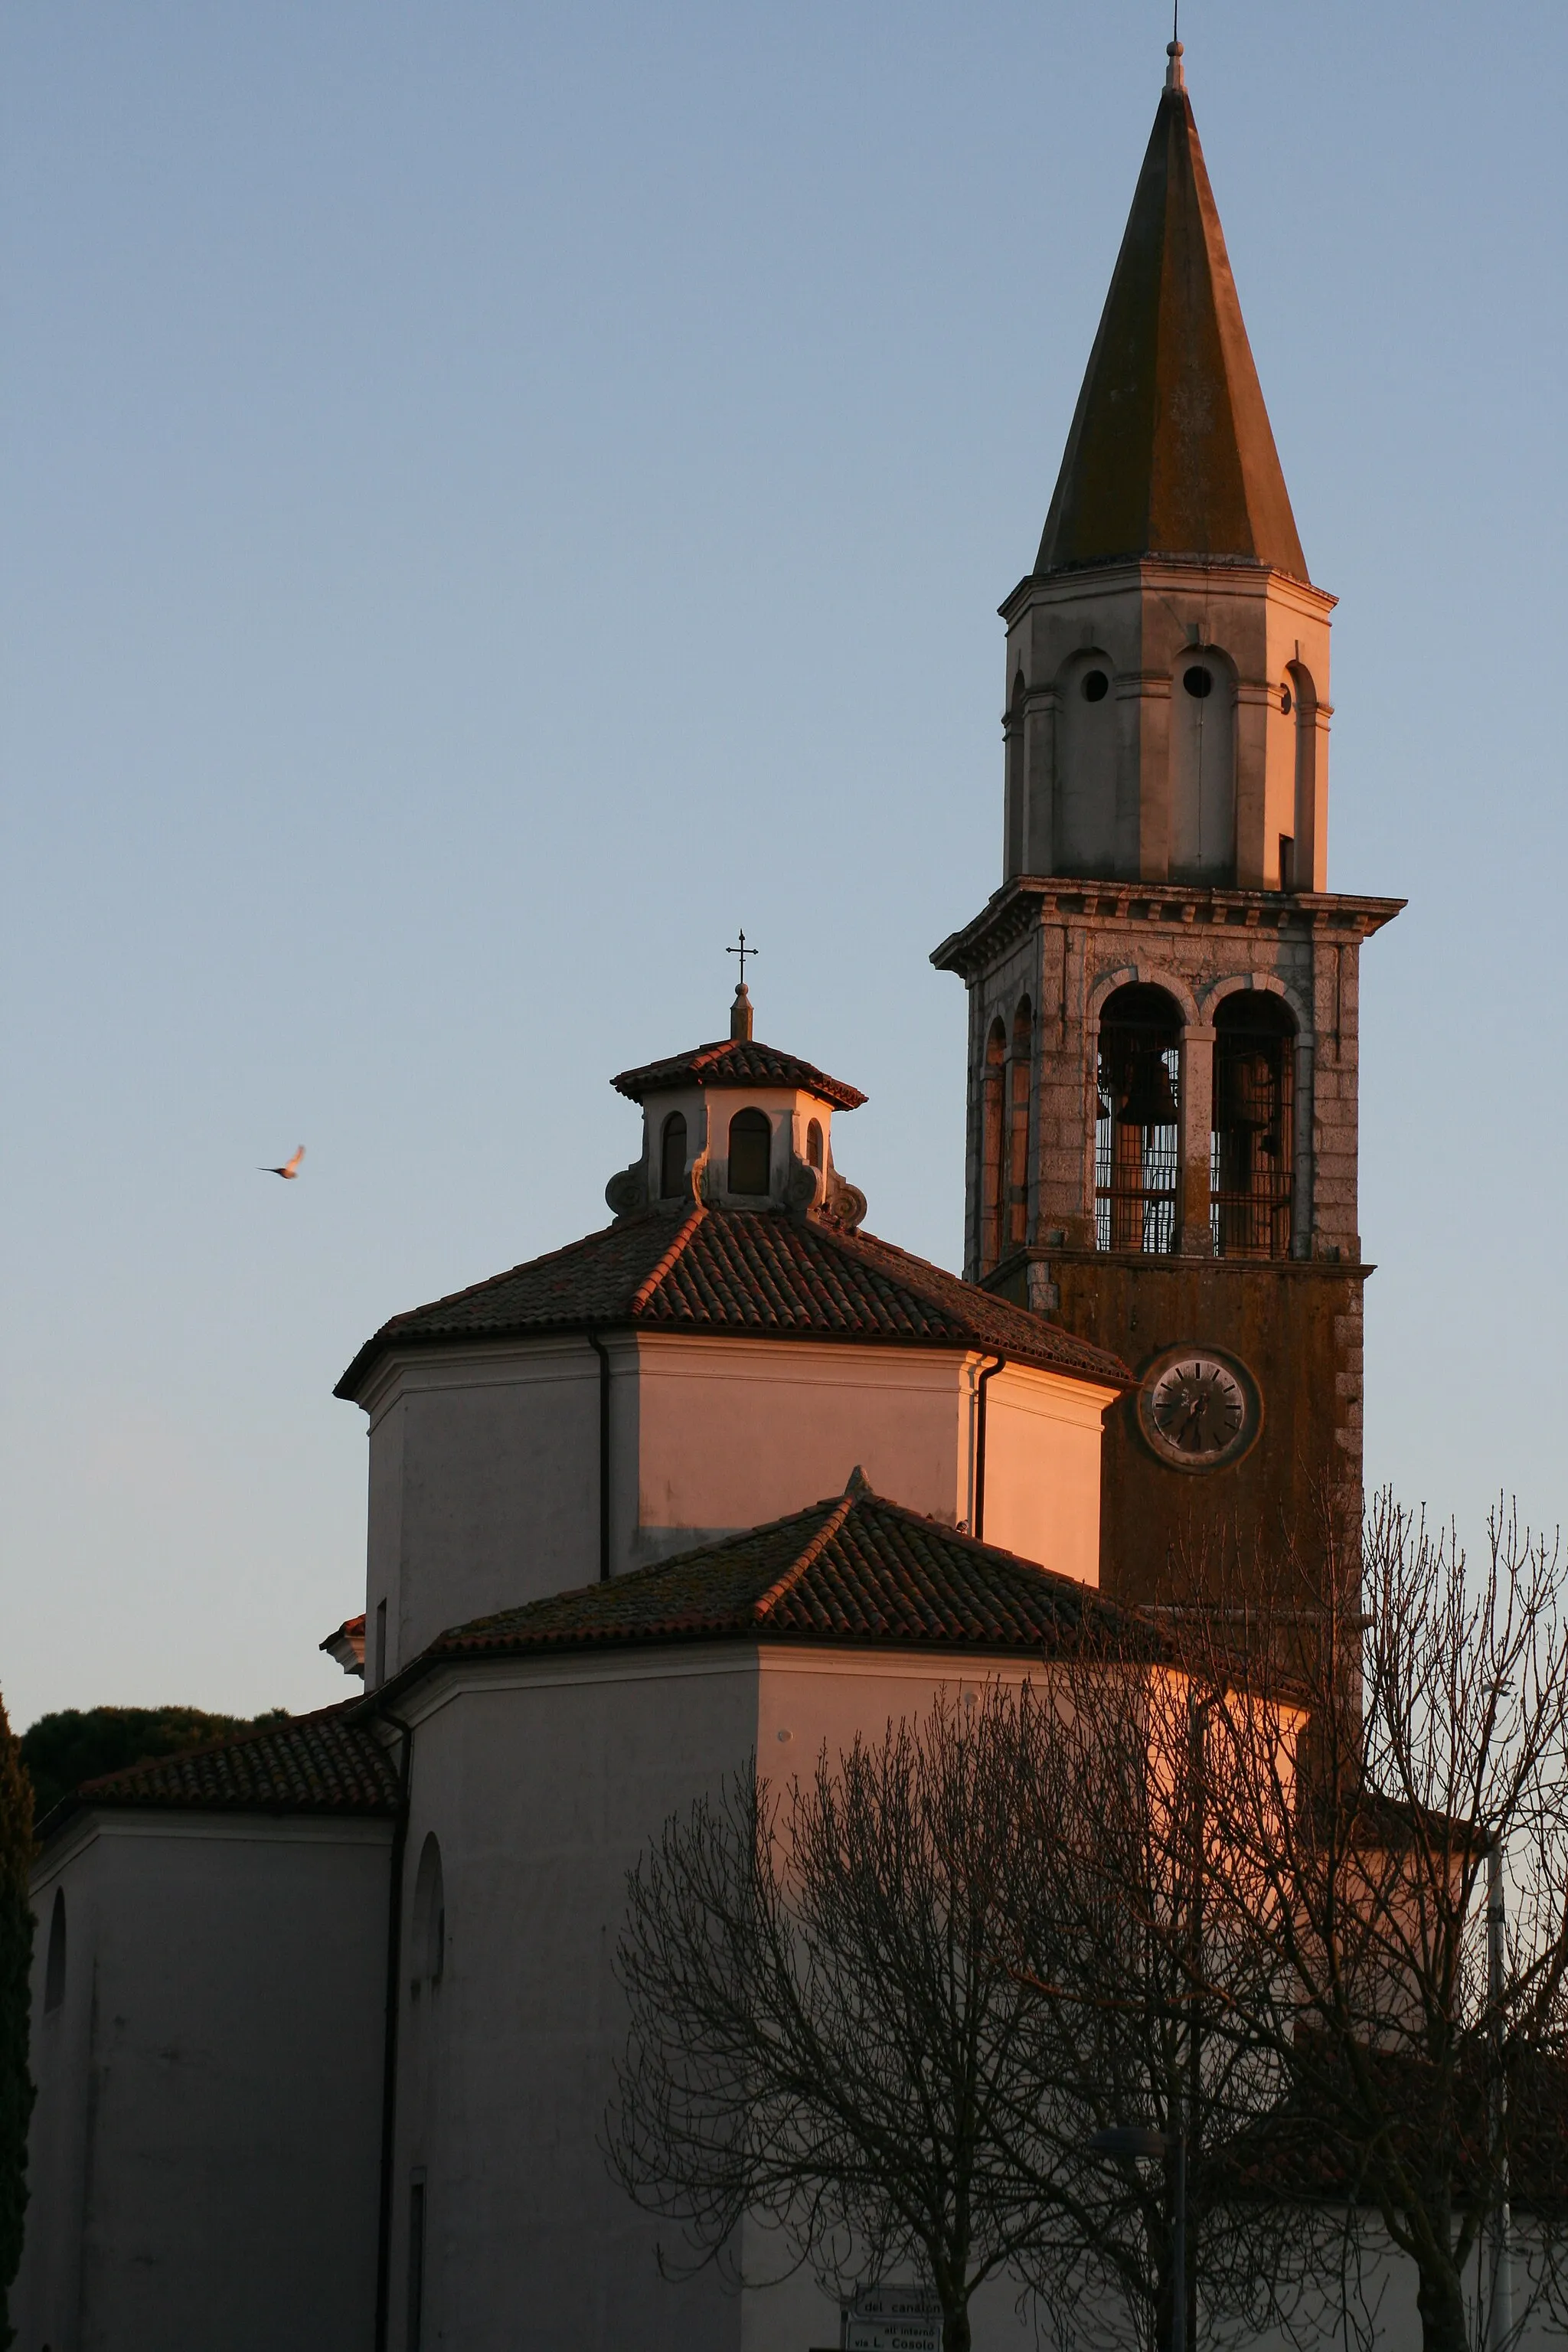 Photo showing: This image shows the architecture of the rear view with respect to the main entrance of the Church of Santa Maria Maddalena, located in the village of Begliano, San Canzian d'Isonzo (GO).